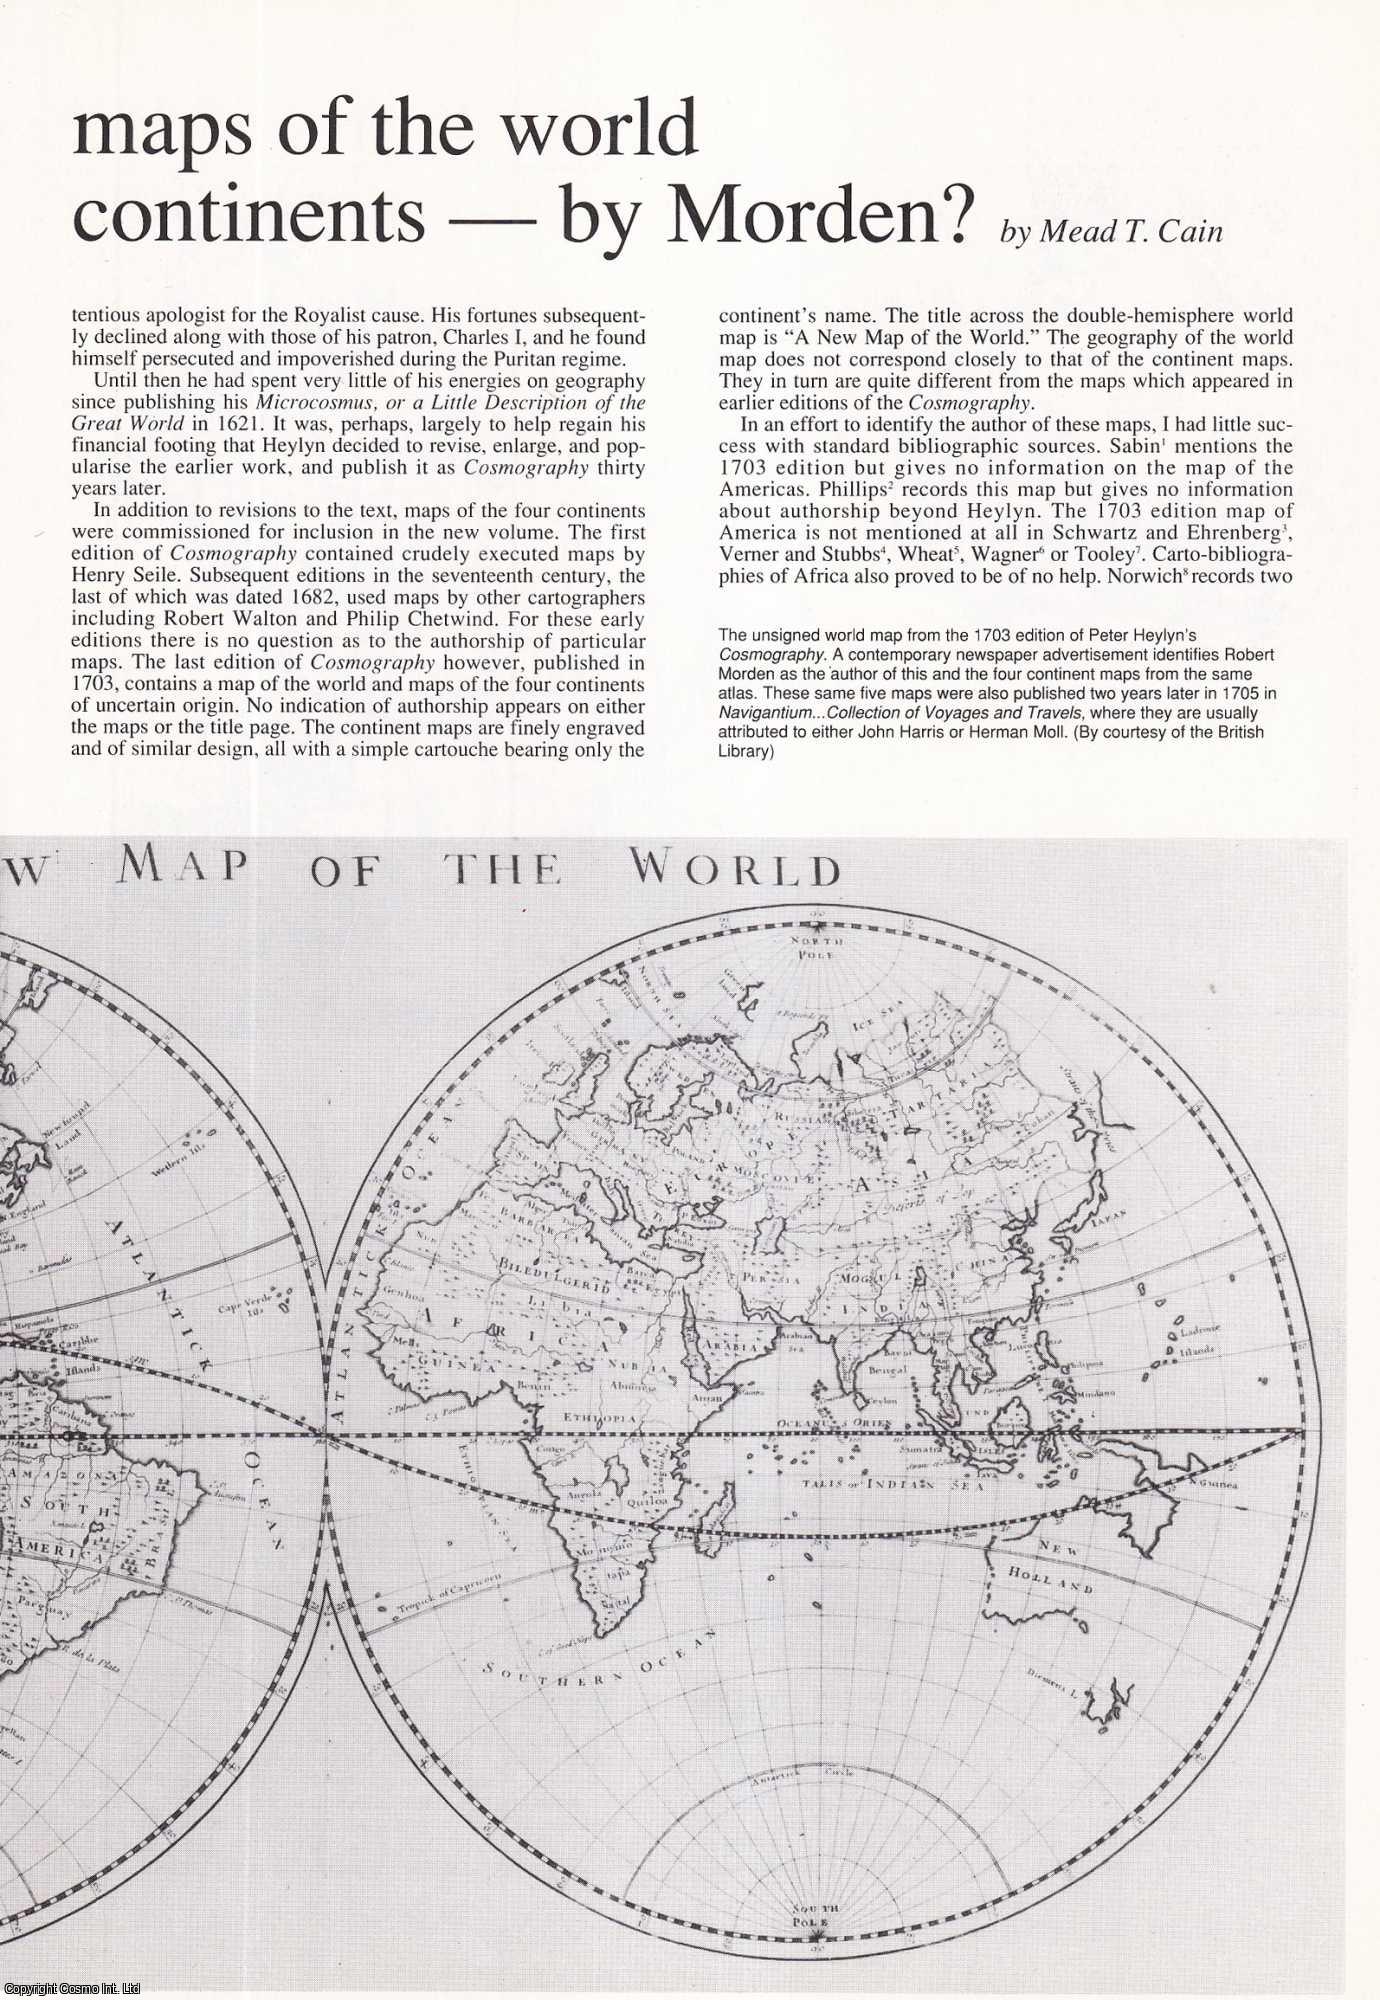 Mead T. Cain - Unrecorded Maps of the World and Four Continents, by Morden? An original article from Map Collector Magazine, 1991.